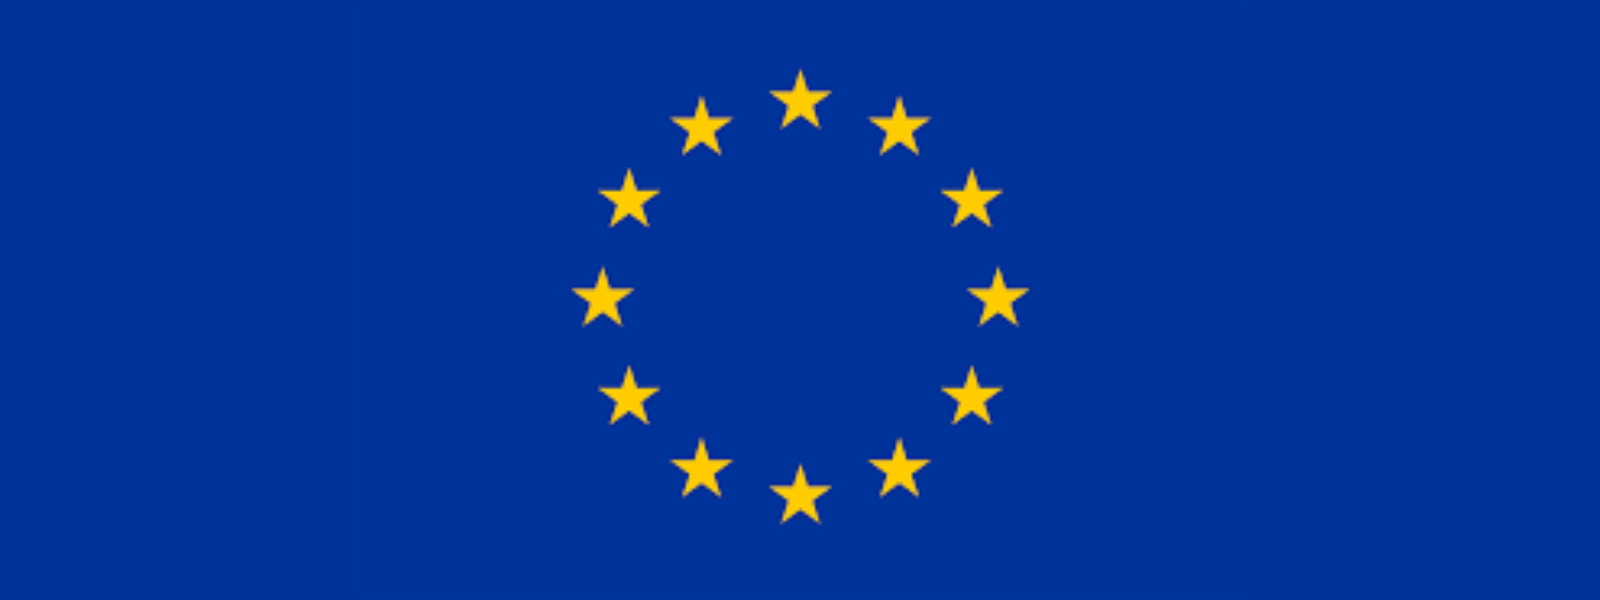 SL Presidential Election Act must be revised: EU